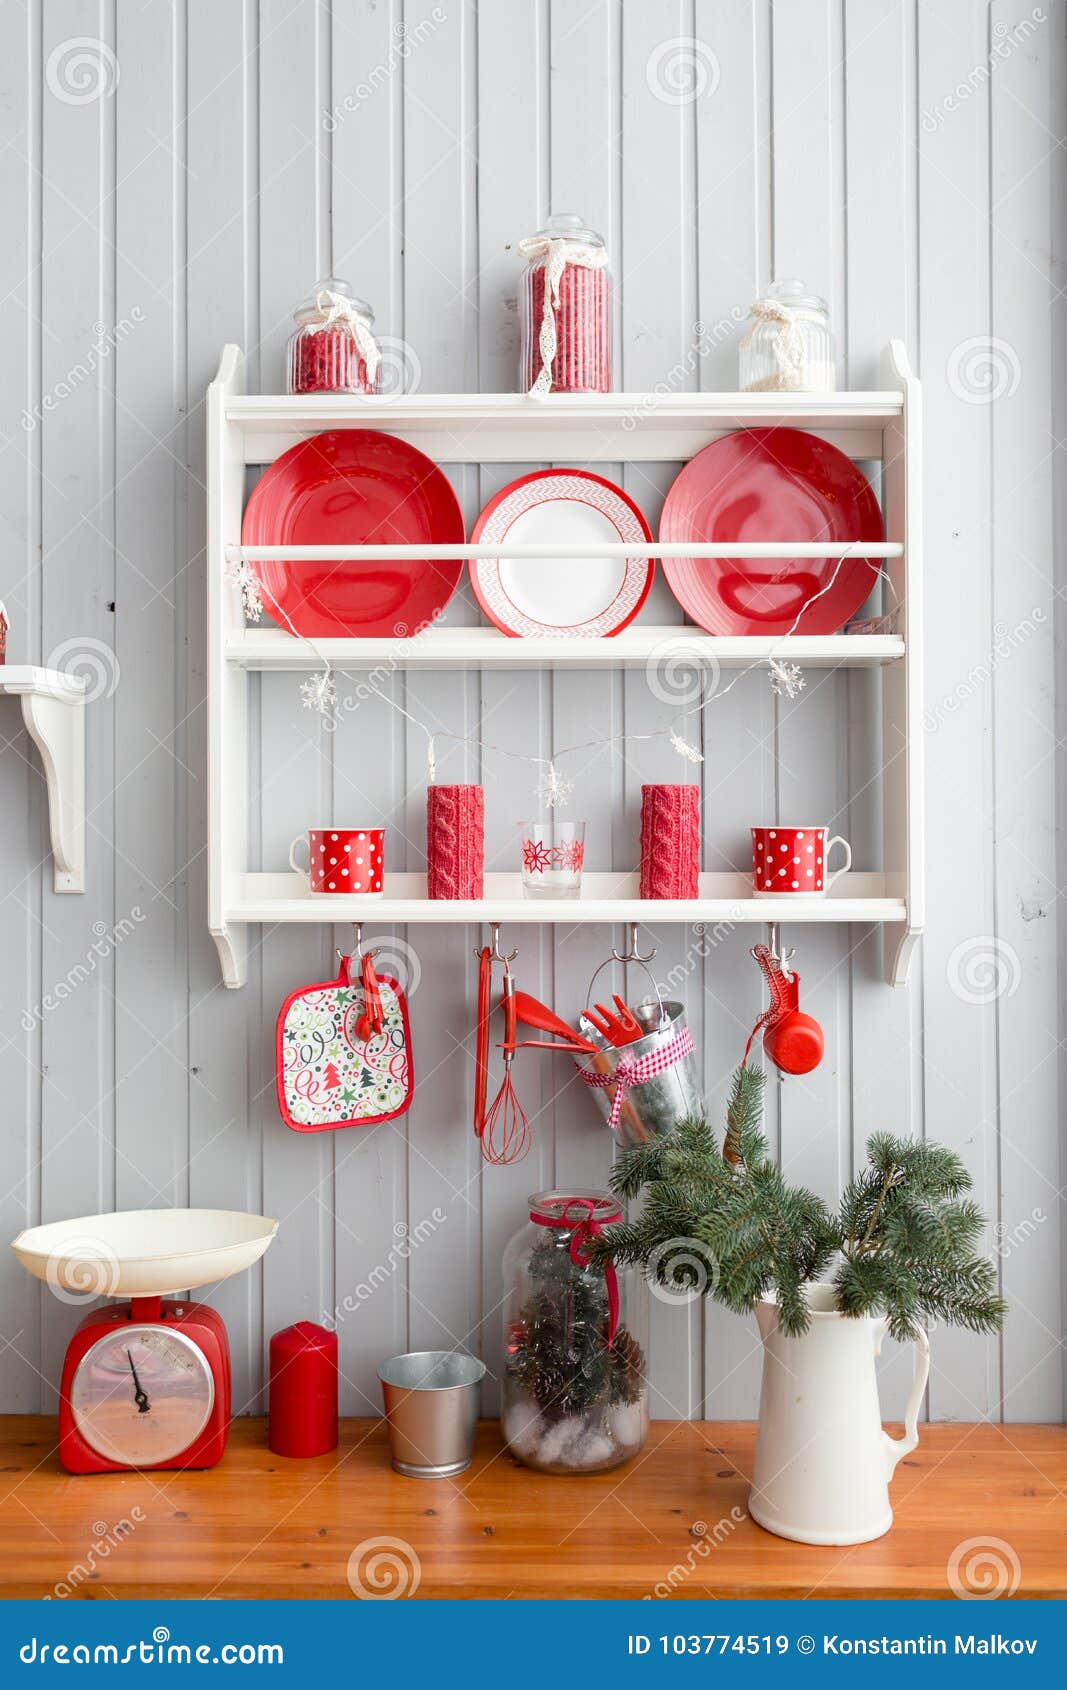 Shelves with Dishes. Interior Light Grey Kitchen and Red Christmas ...